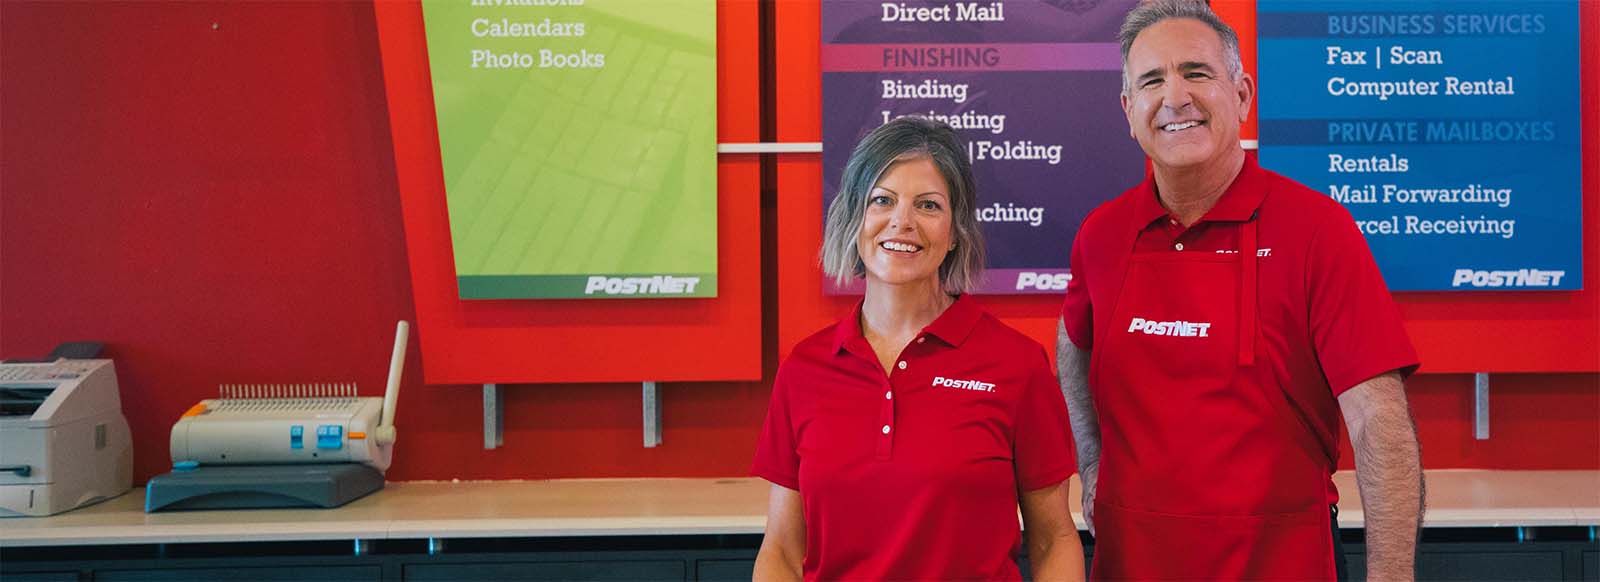 Two Postnet Franchise owners smiling for photo.